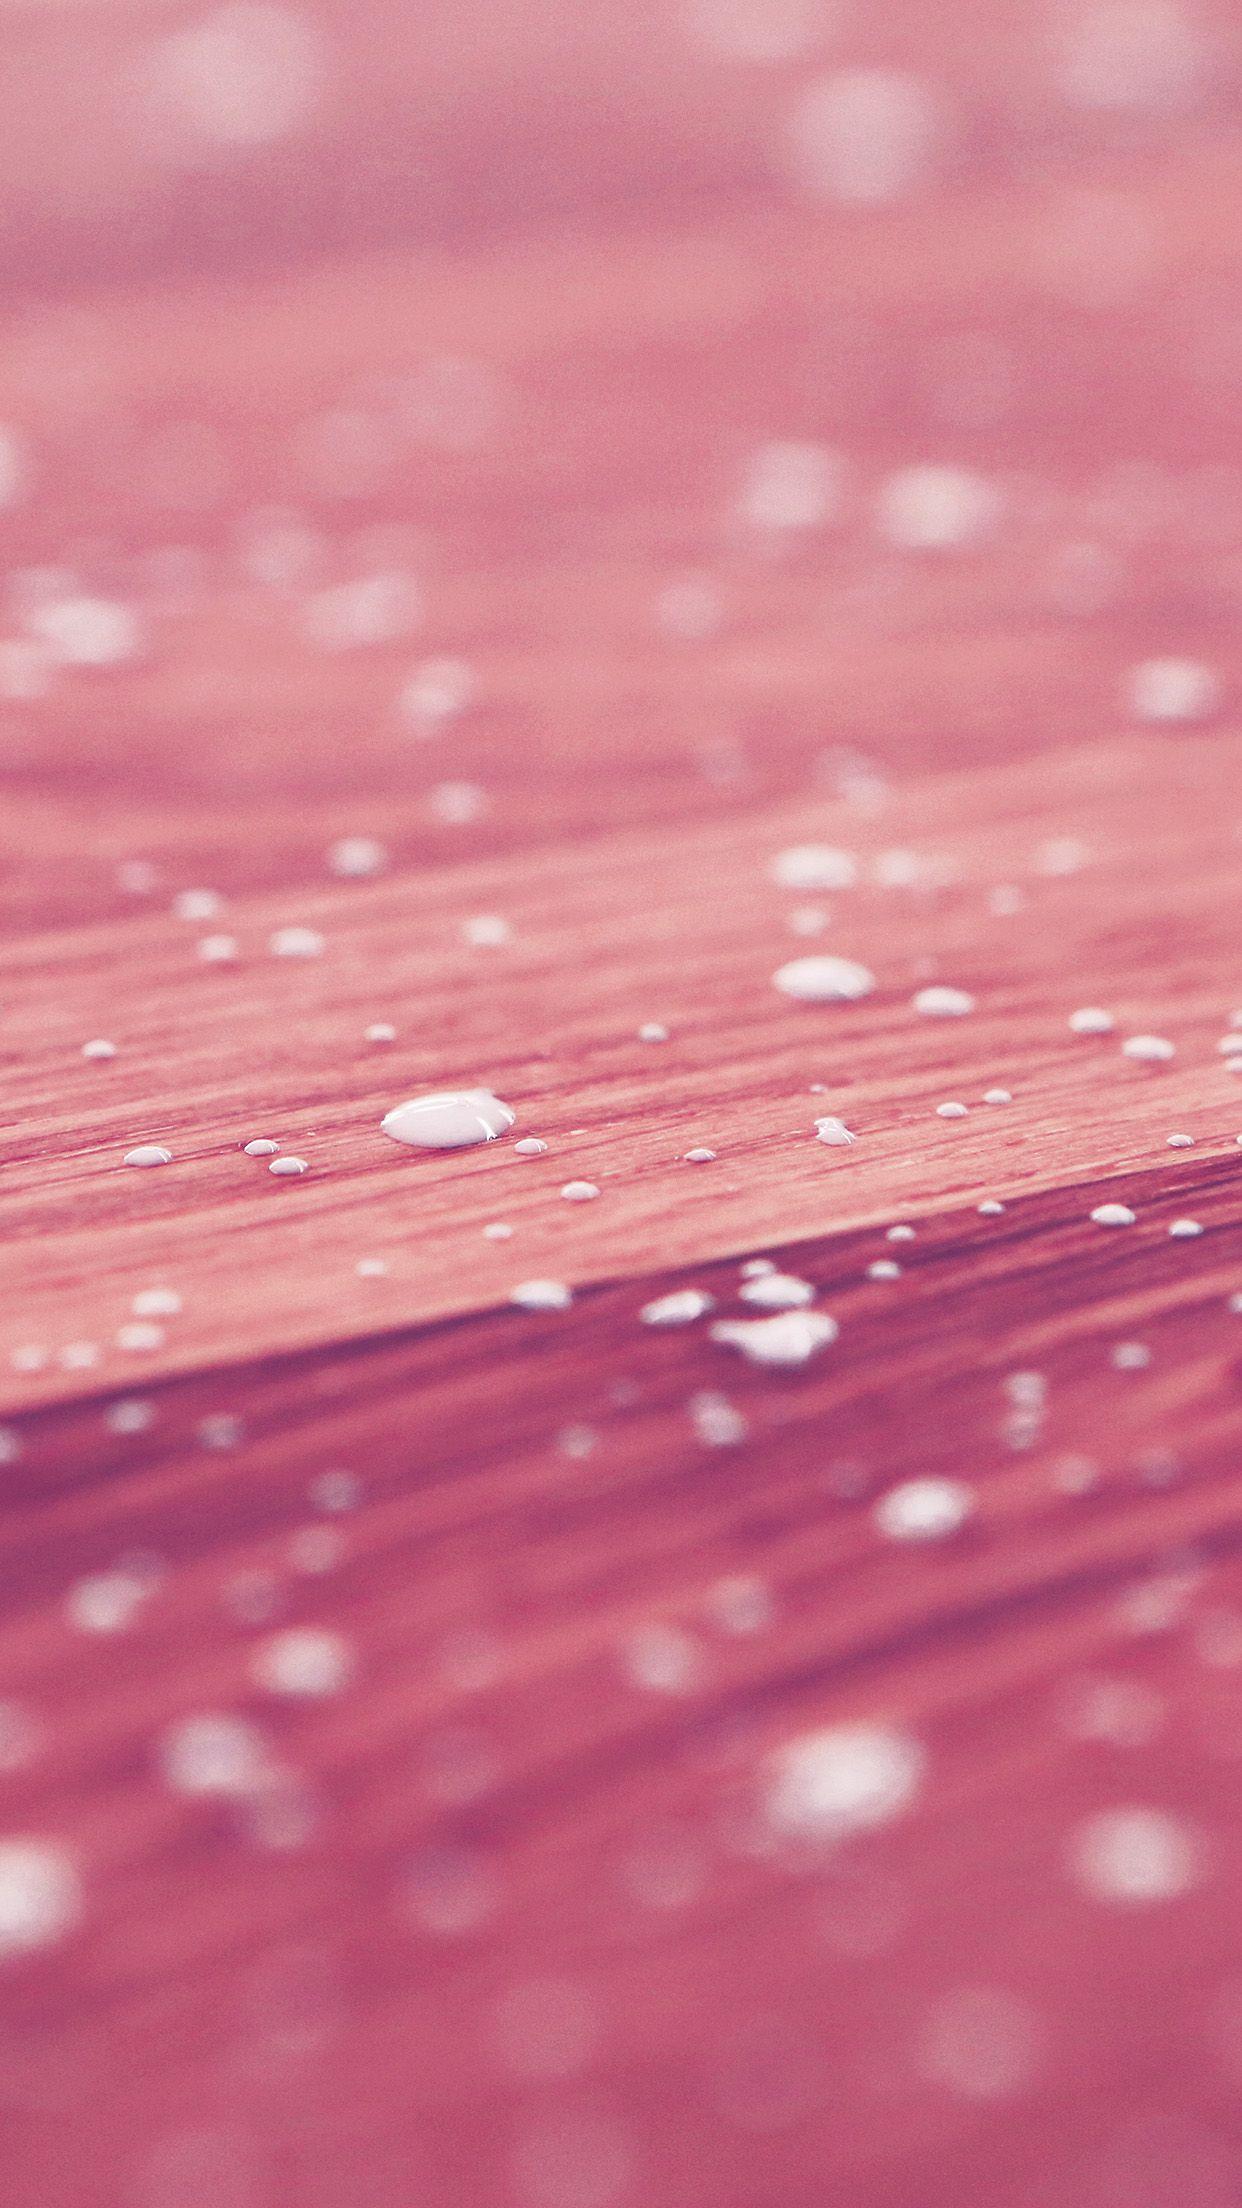 Drops Of Milk On Floor Pattern Nature Pink Red Android wallpaper